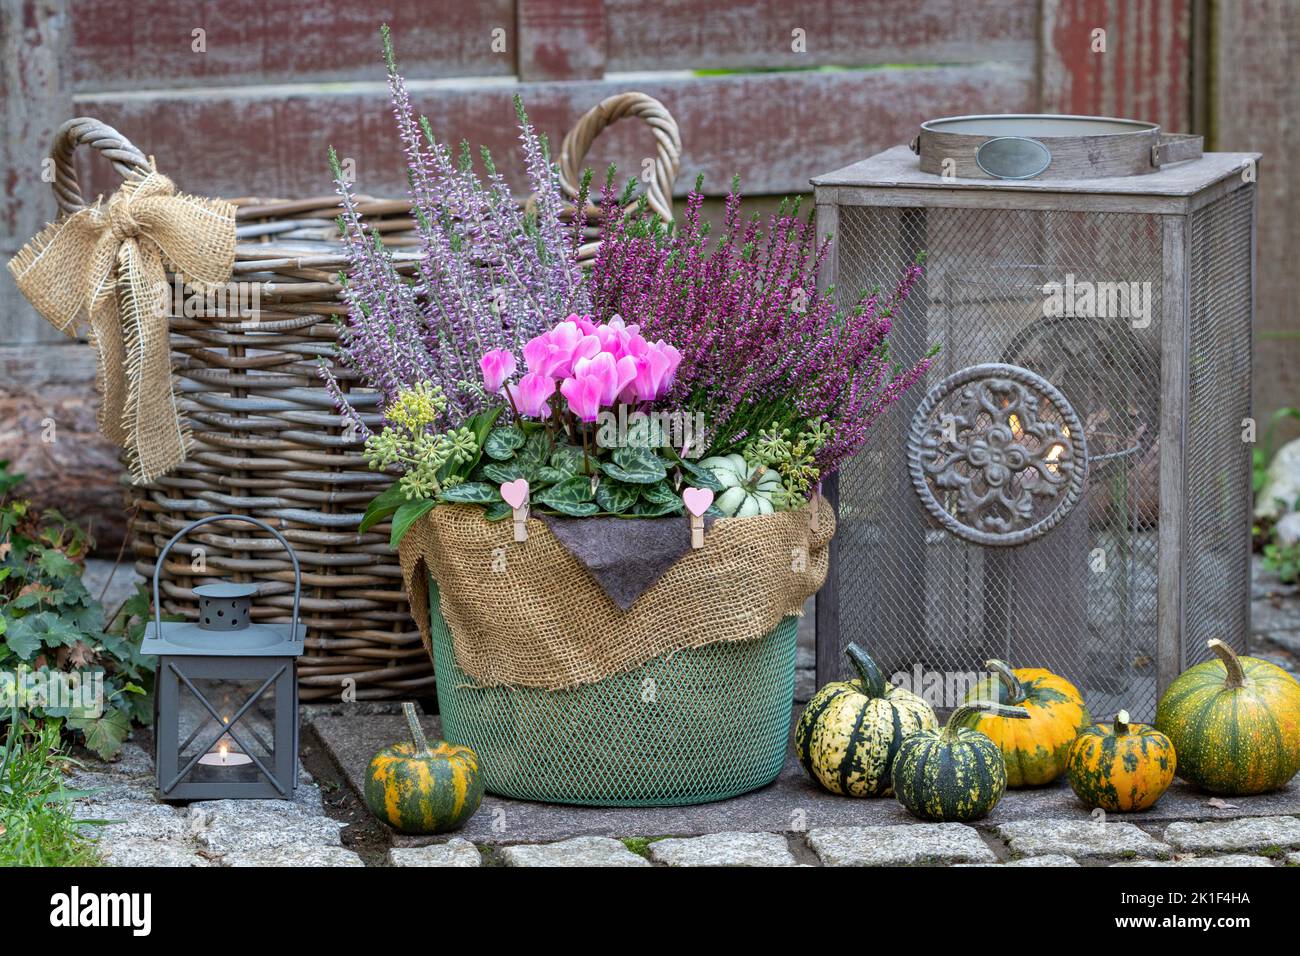 arrangement with pink cyclamen and heather flowers in basket and lanterns in garden Stock Photo